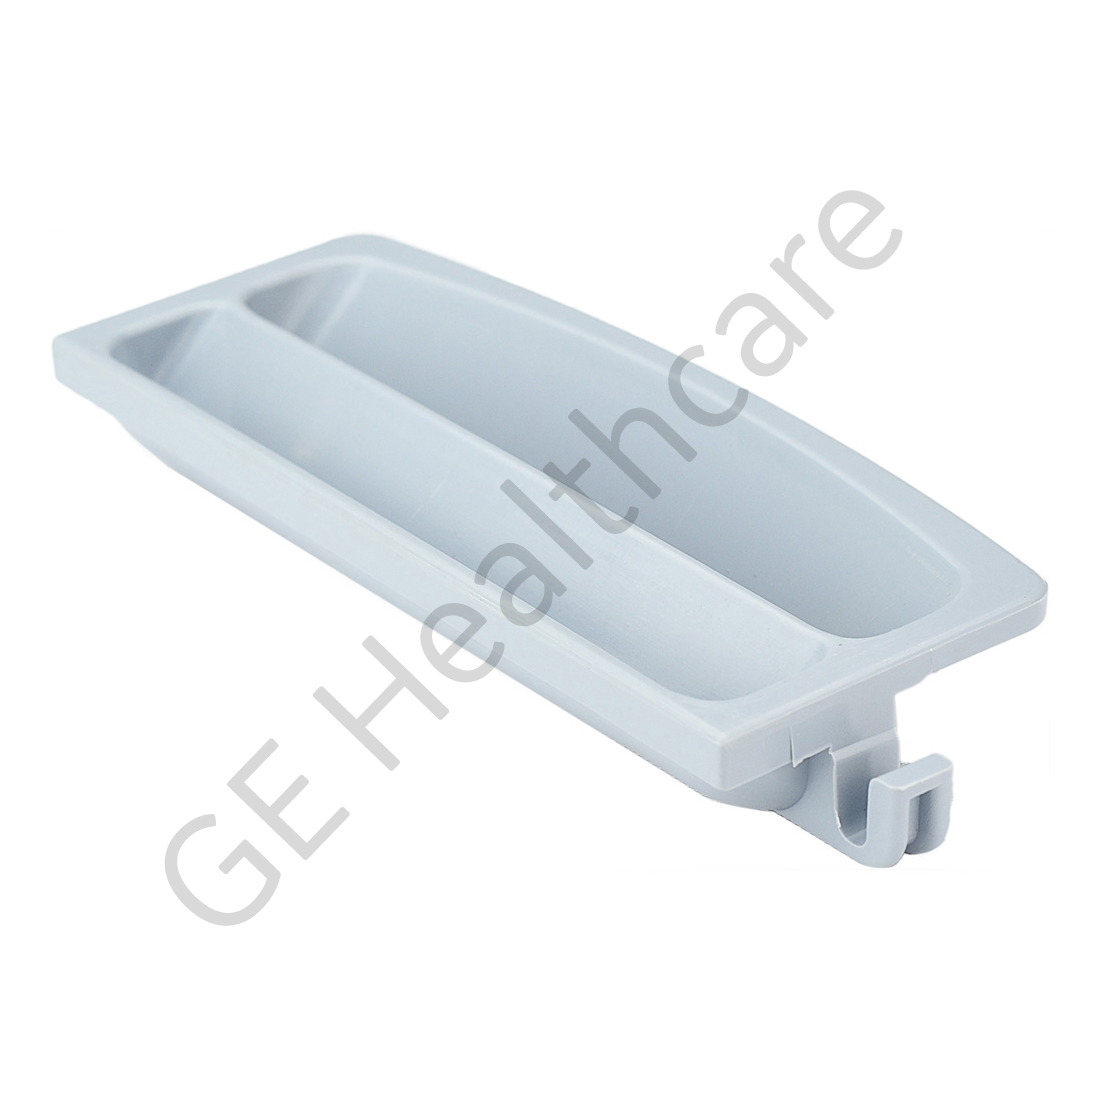 Drawer Handle - Injection Molded Plastic